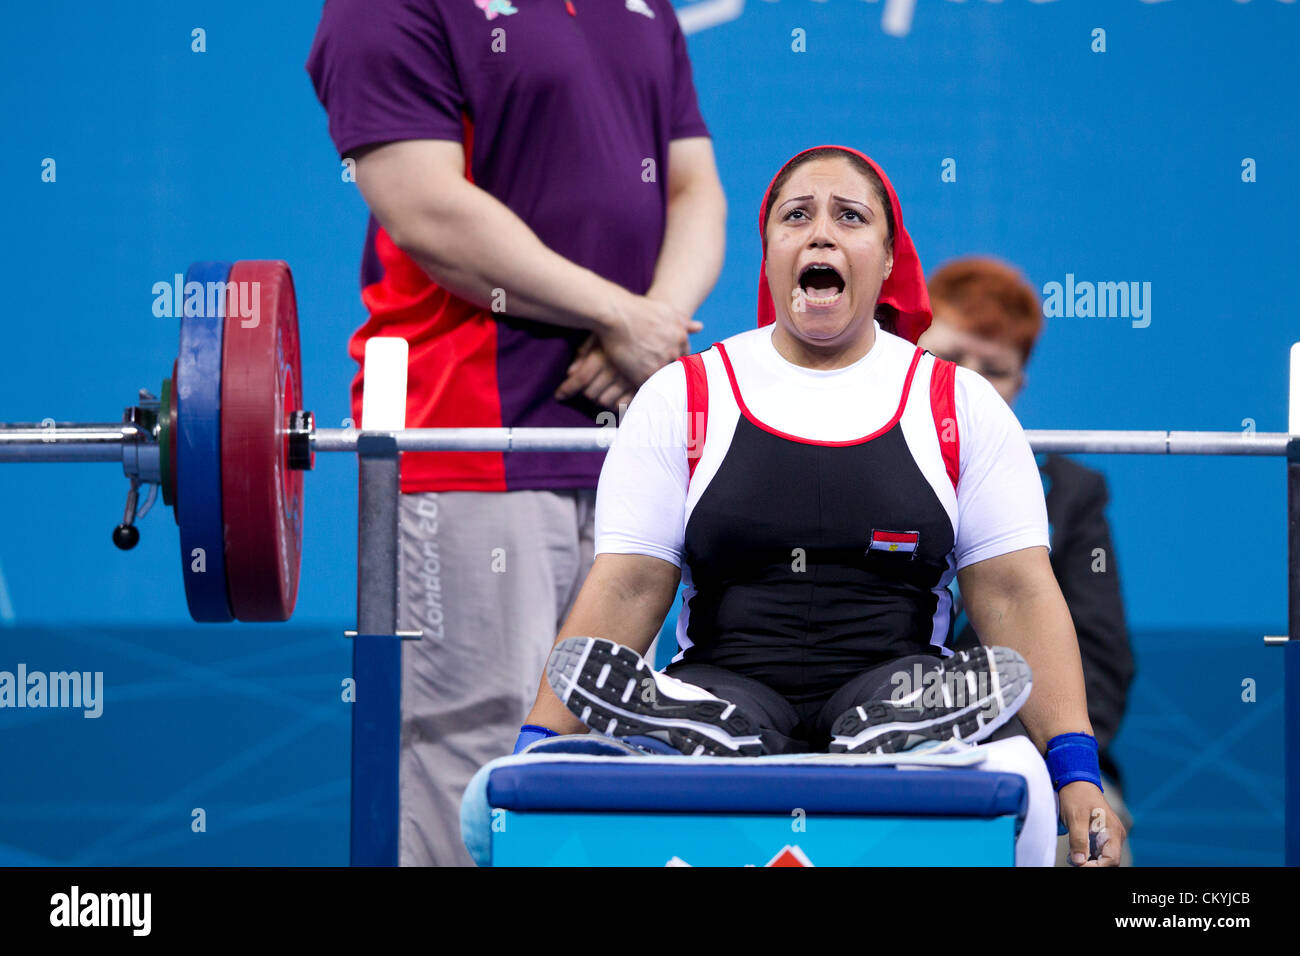 Egypt's Amany Ali lets out a yell before lifting in the women's 75kg powerlifting competition at the London Paralympics. Stock Photo